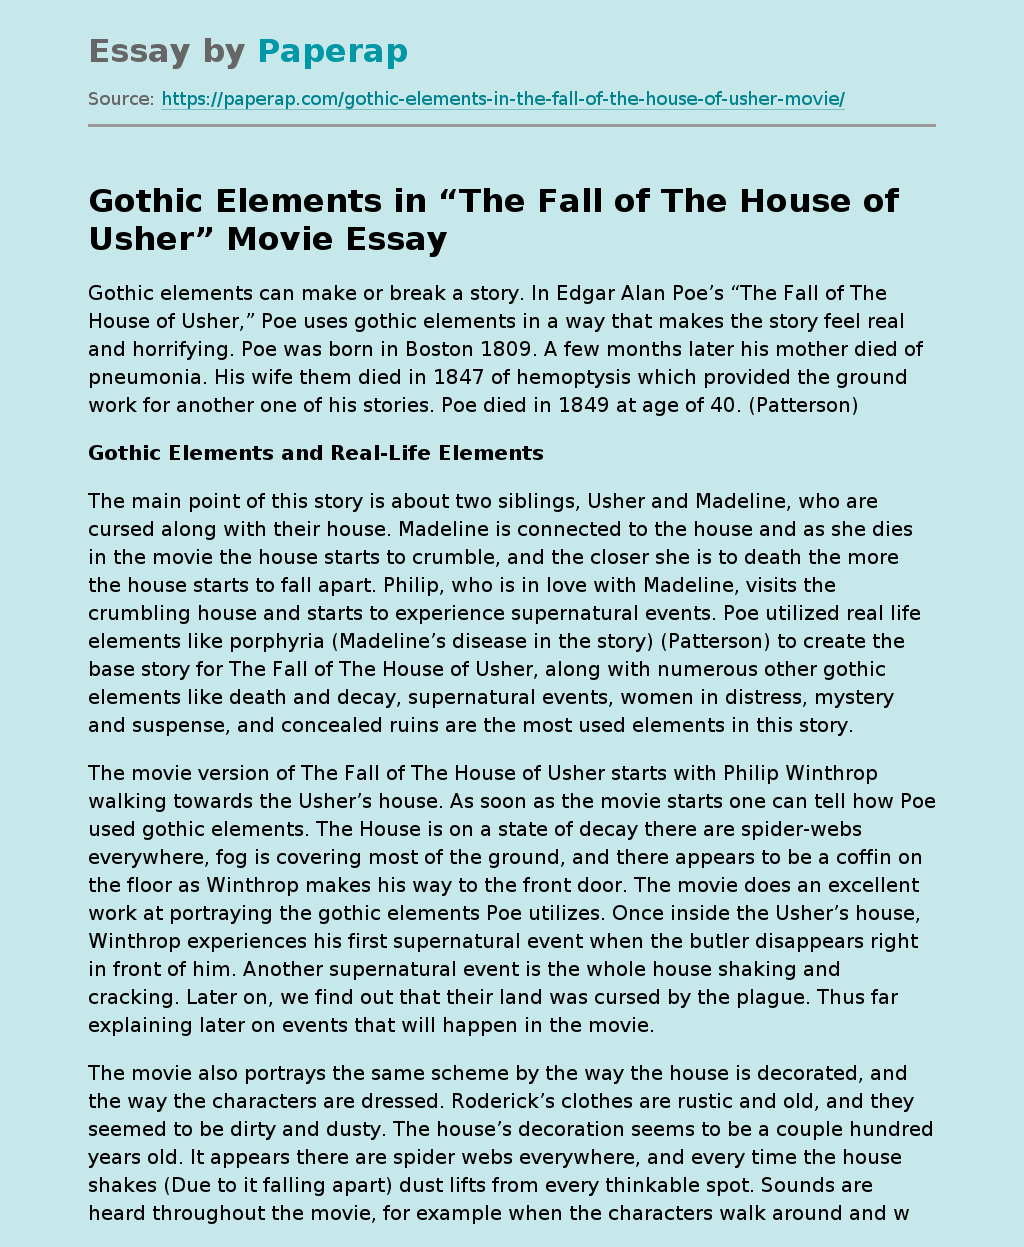 Gothic Elements in “The Fall of The House of Usher” Movie